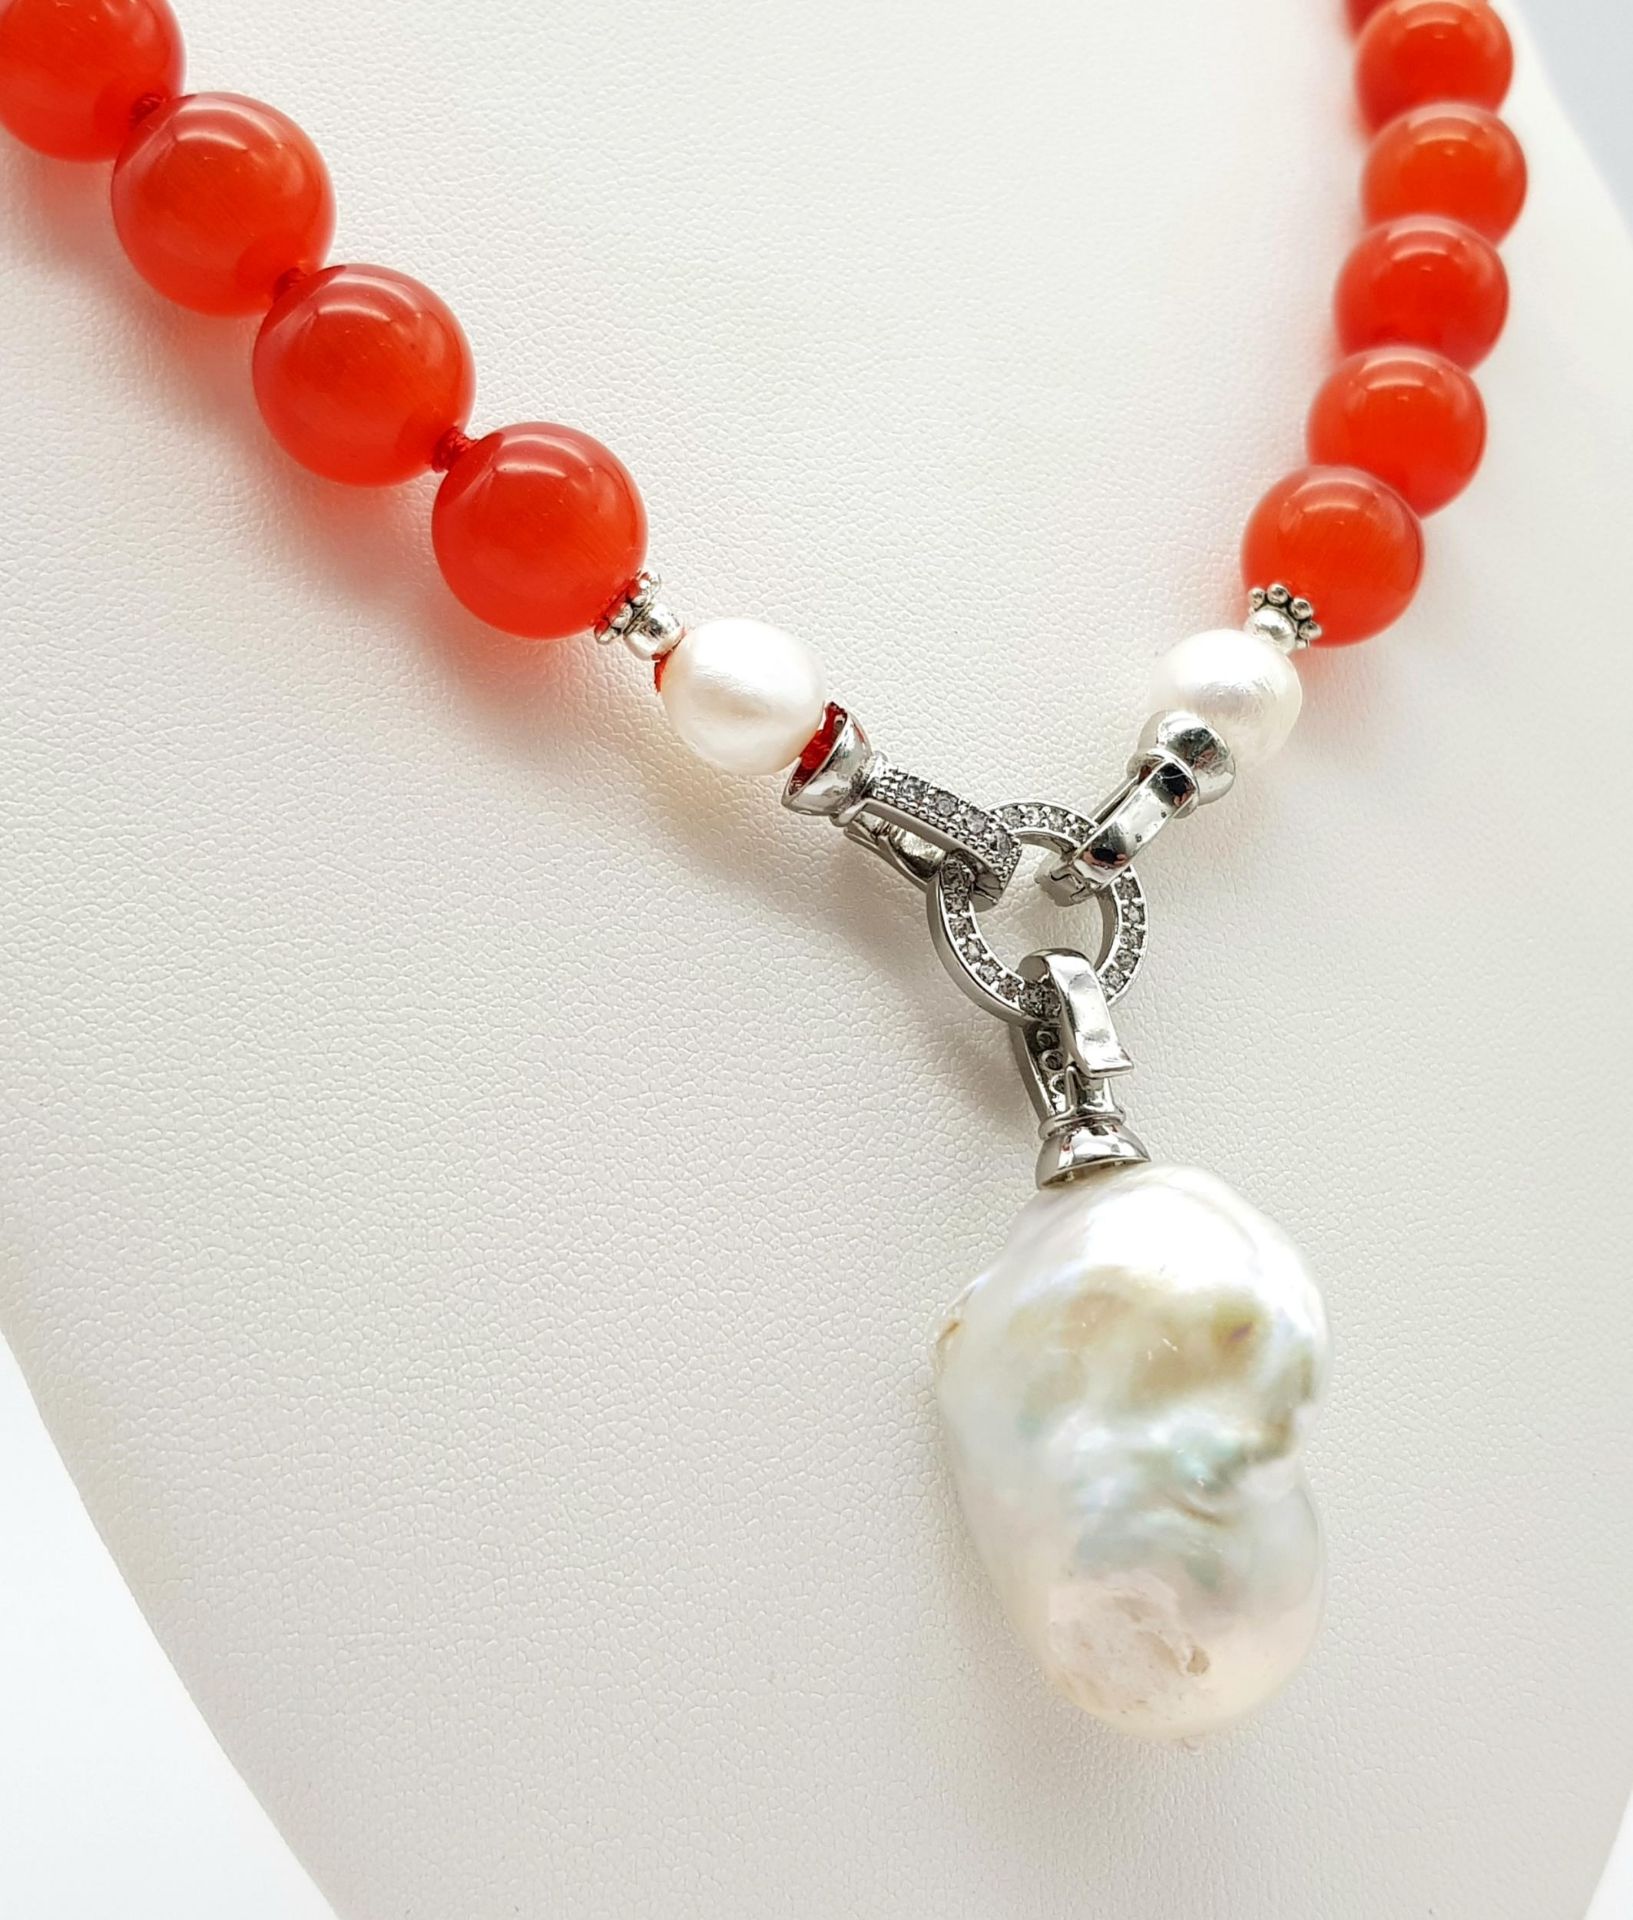 A Deep Orange Cat's Eye Beaded Necklace with a Hanging Keisha Baroque Pearl Pendant. 12mm beads. - Bild 2 aus 4